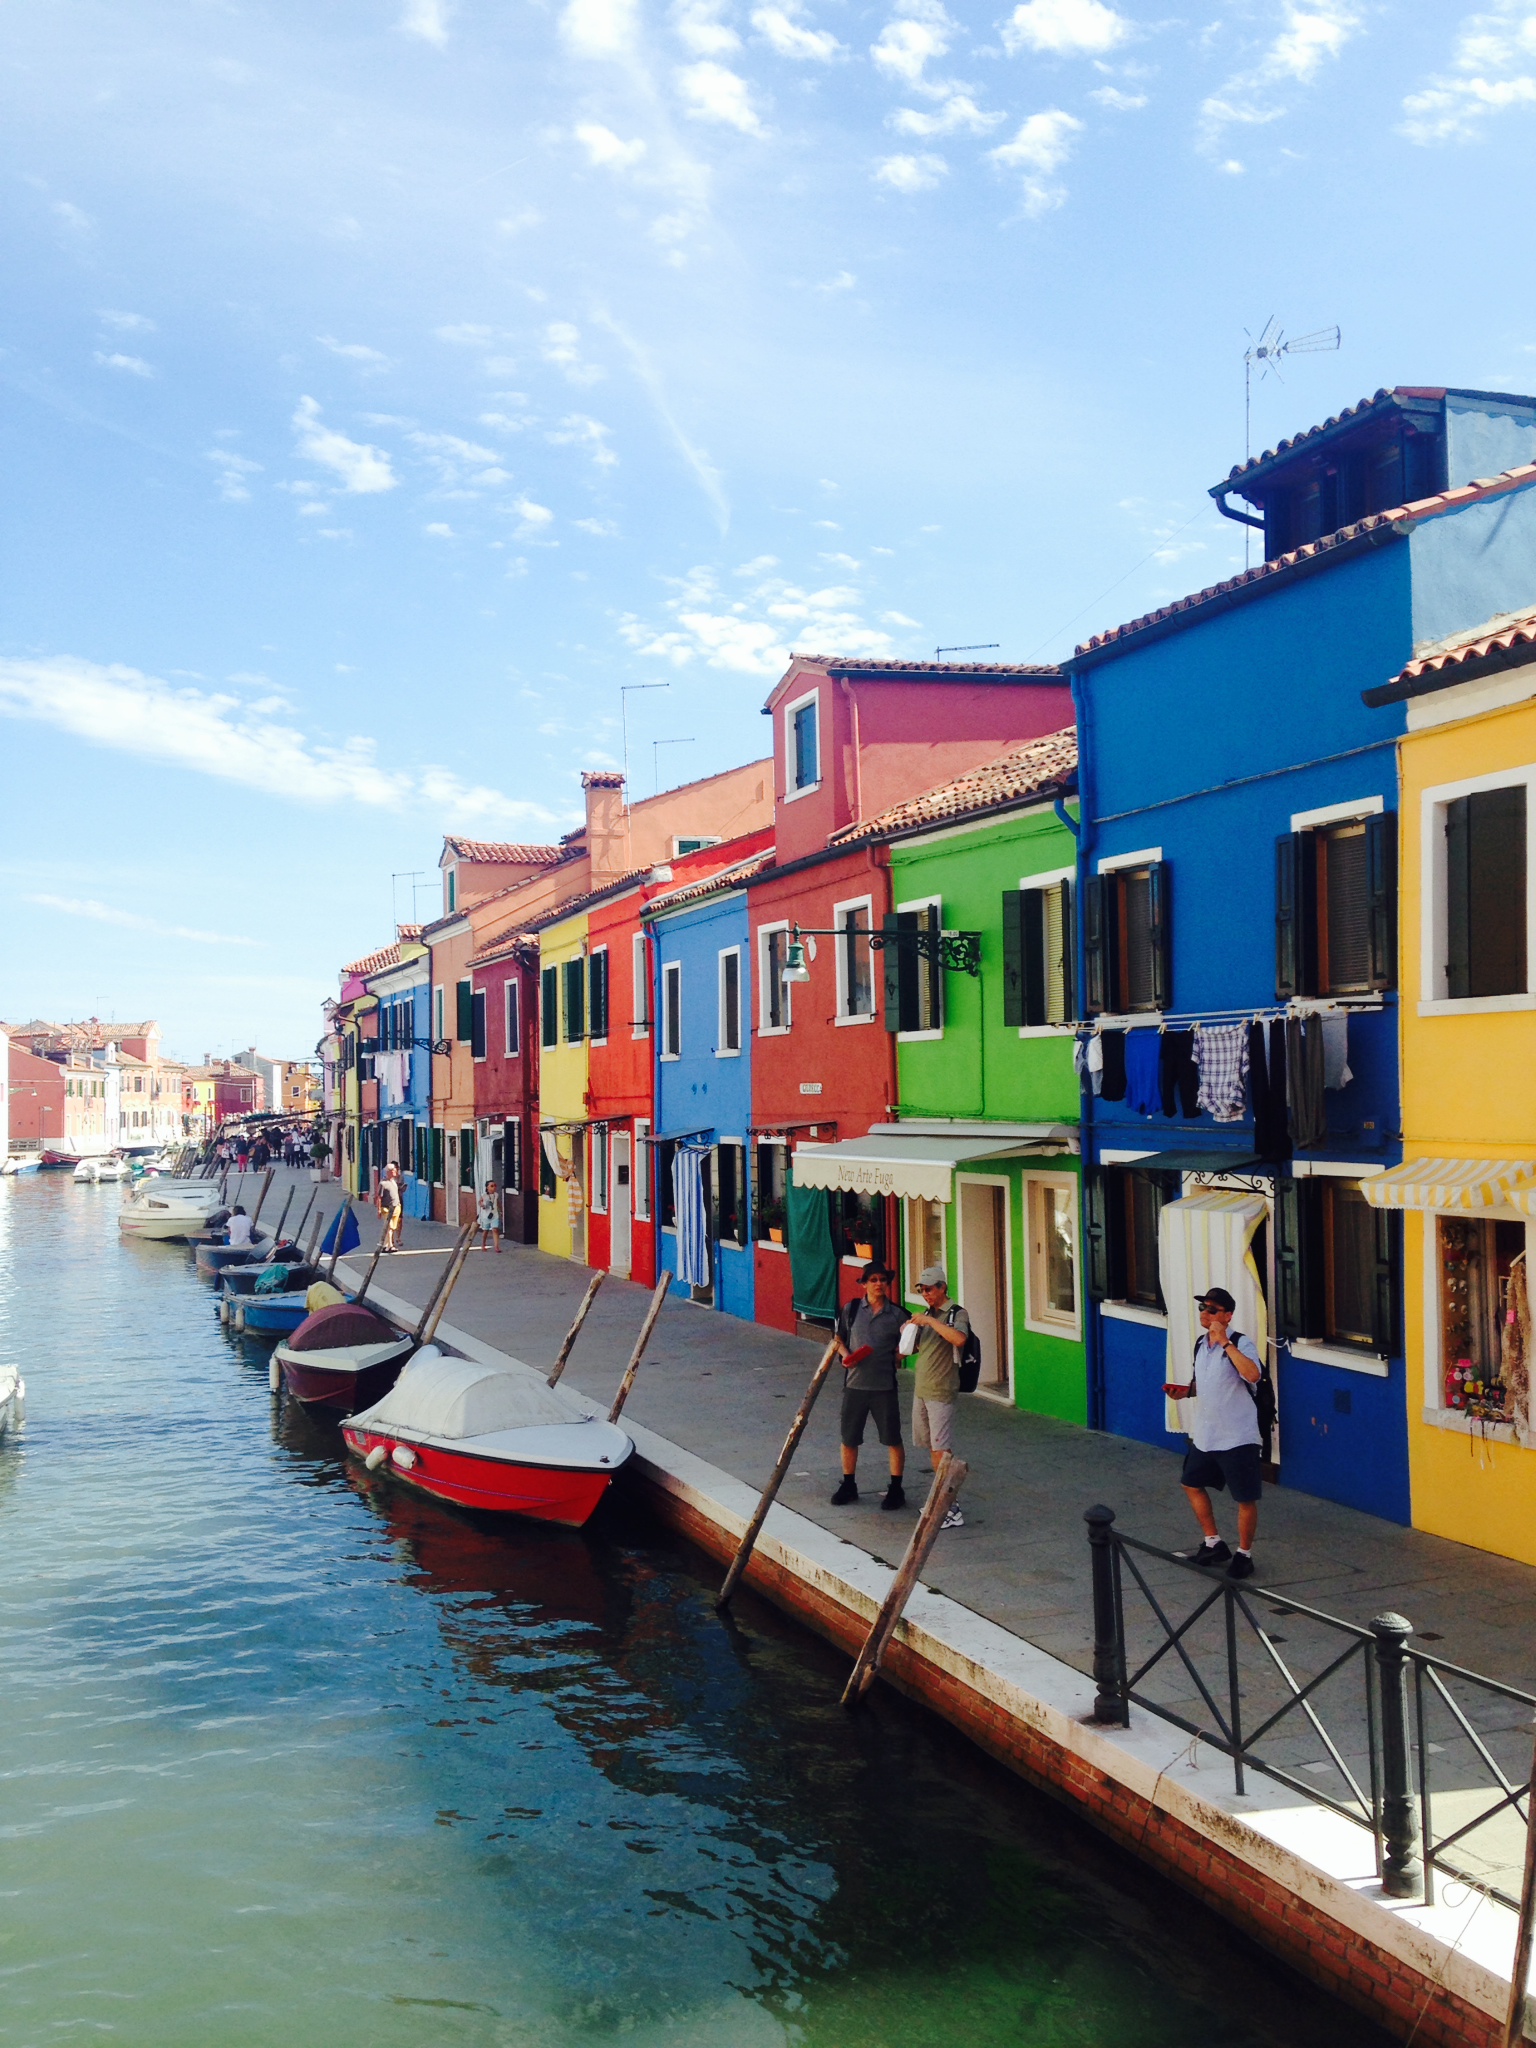 Colorful buildings on a canal in Burano, Italy